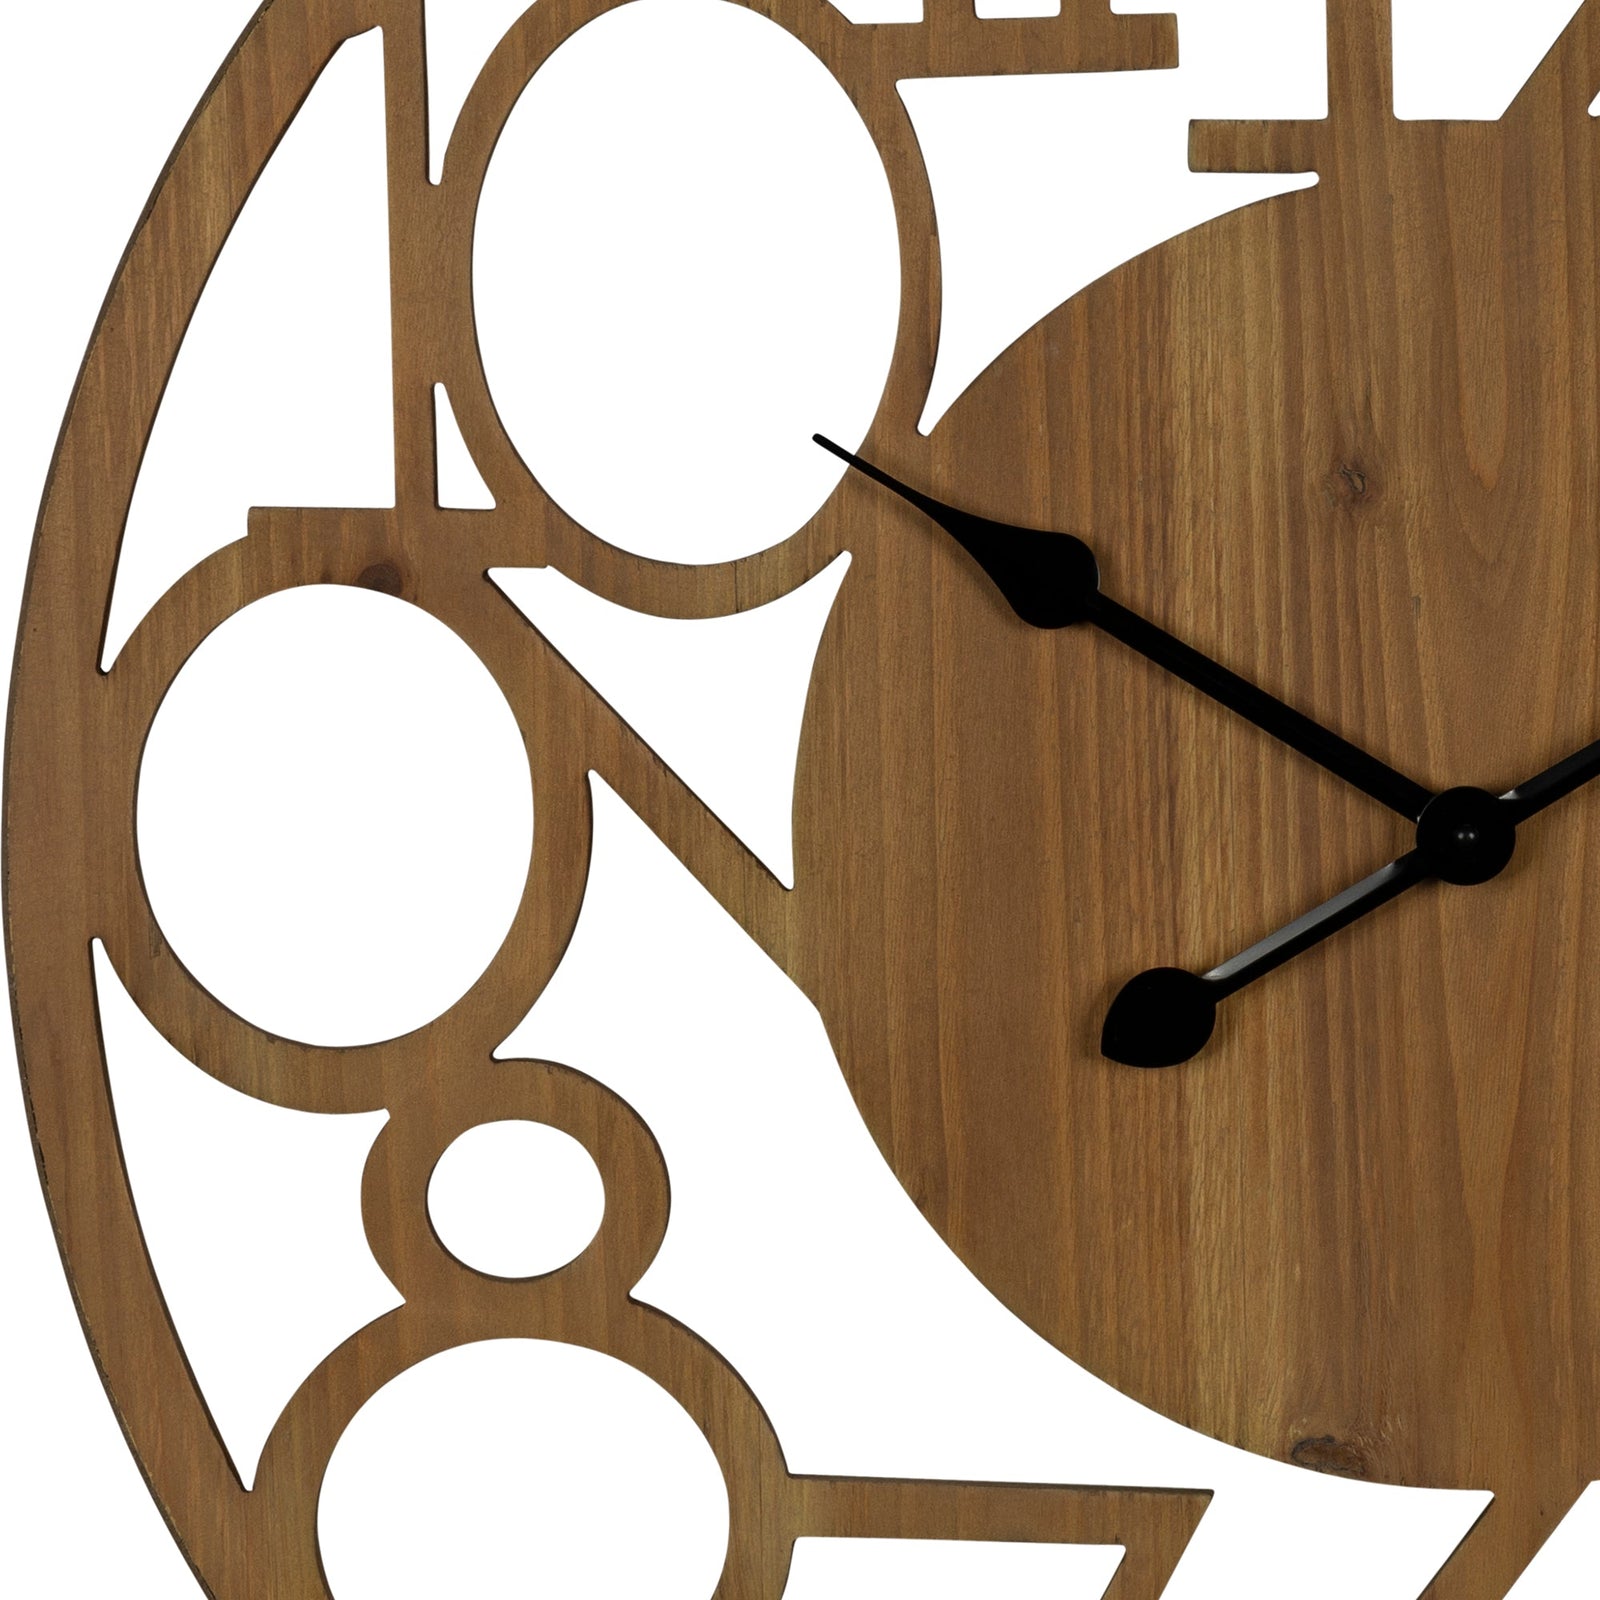 Hand Crafted Natural Wood Modern Home Office Decorative Wall Clock